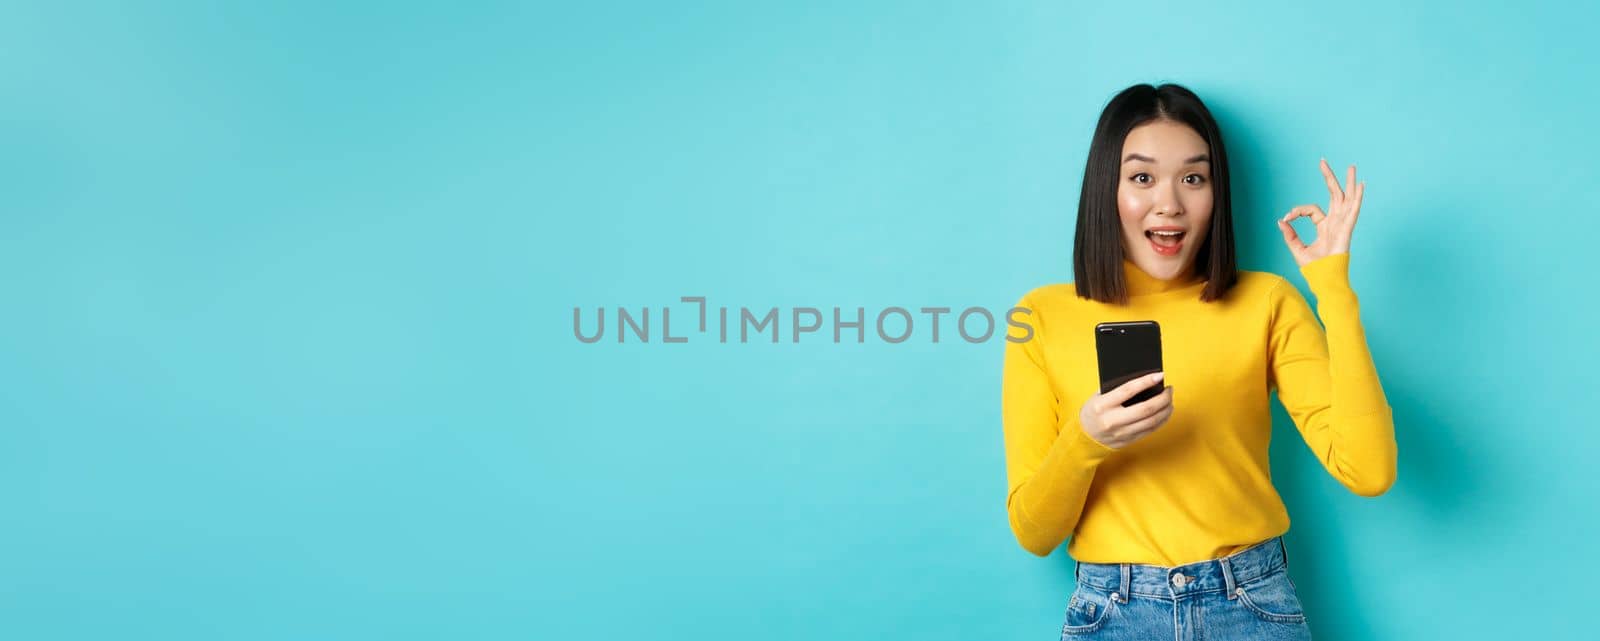 E-commerce and online shopping concept. Portrait of asian woman showing OK sign and using mobile phone, recommend application, standing over blue background.